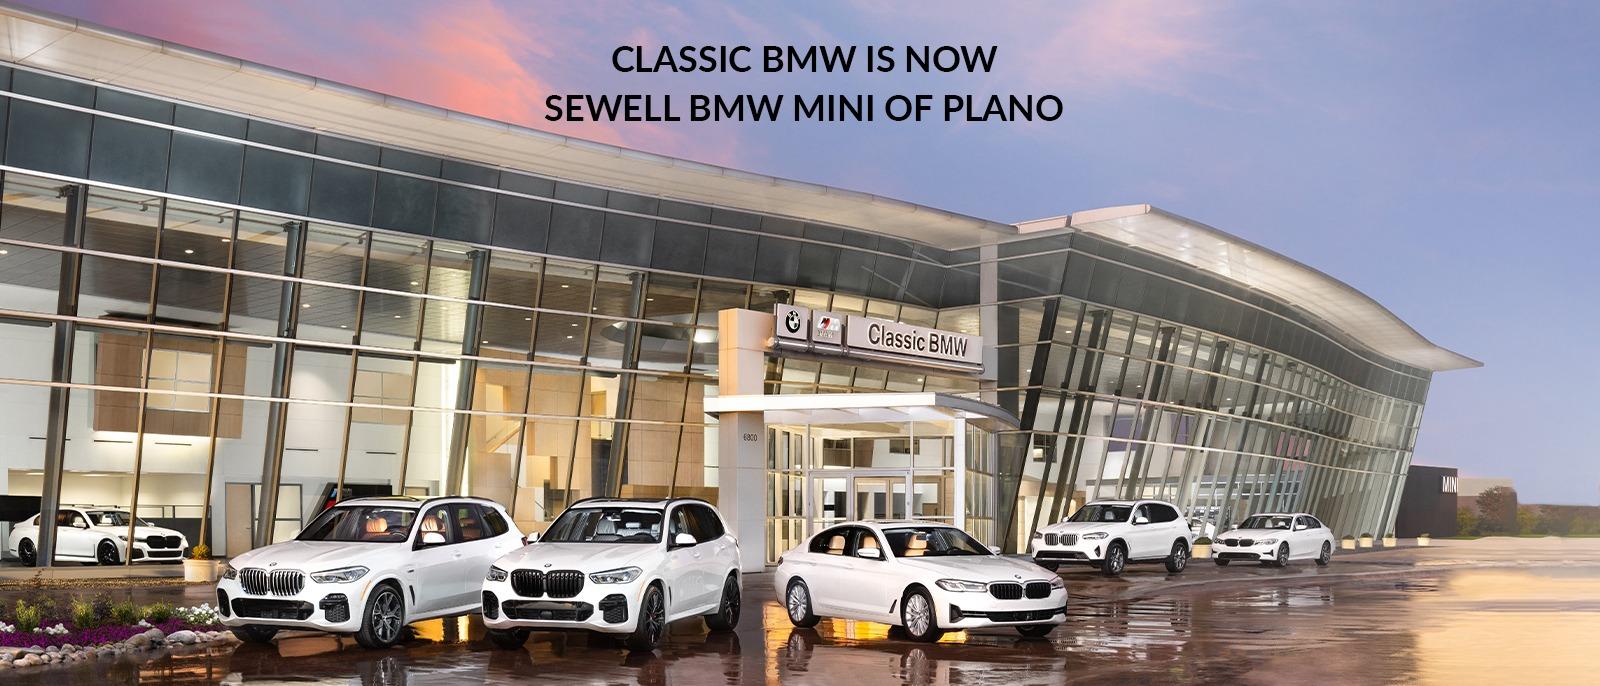 Classic BMW is now Sewell BMW MINI of Plano